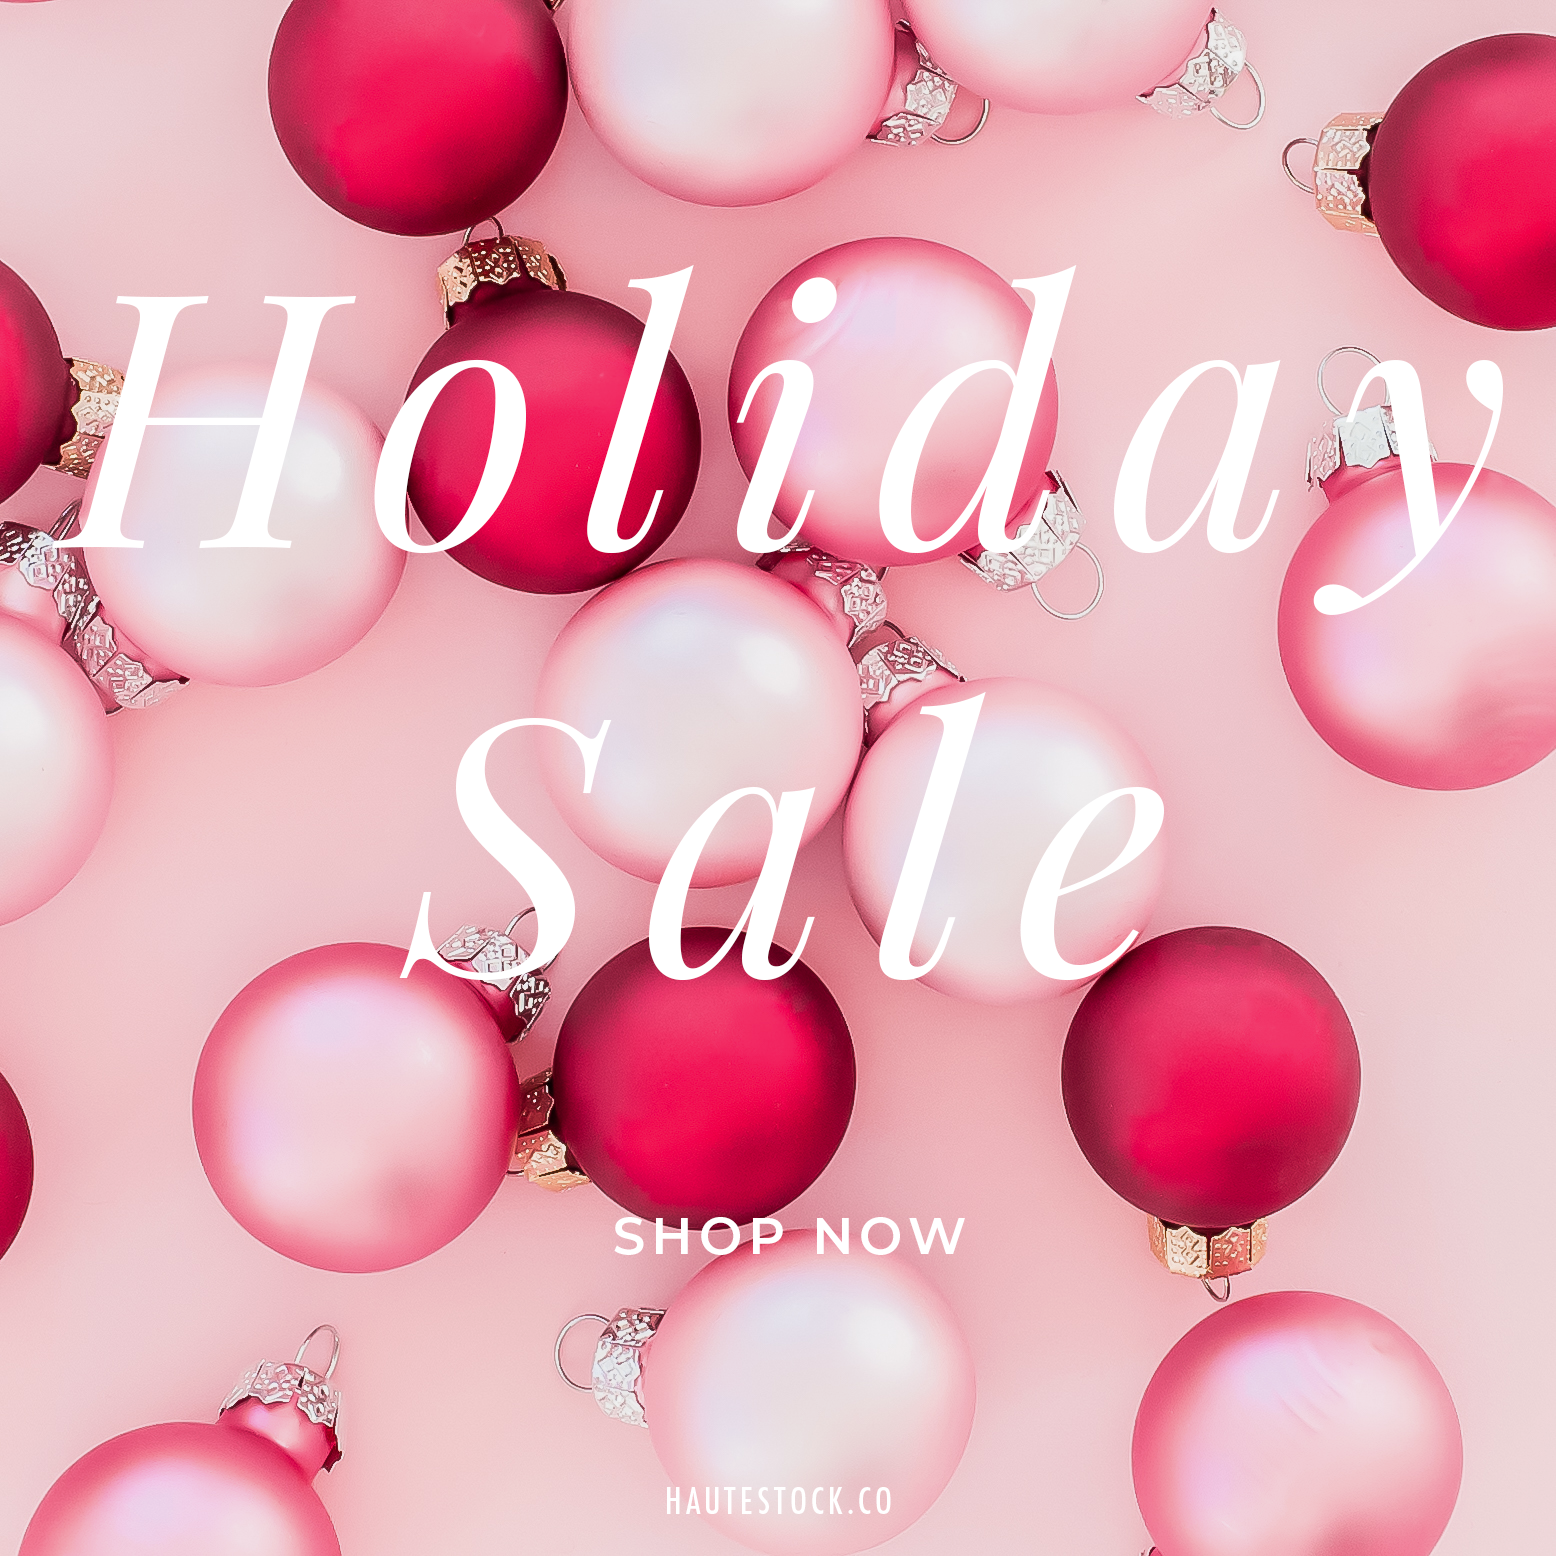 Got a holiday sale coming up? Need gorgeous graphics to advertise the sale? Pink & Red Holiday Collection from Haute Stock looks gorgeous with simple overlayed text. Click to view more examples!